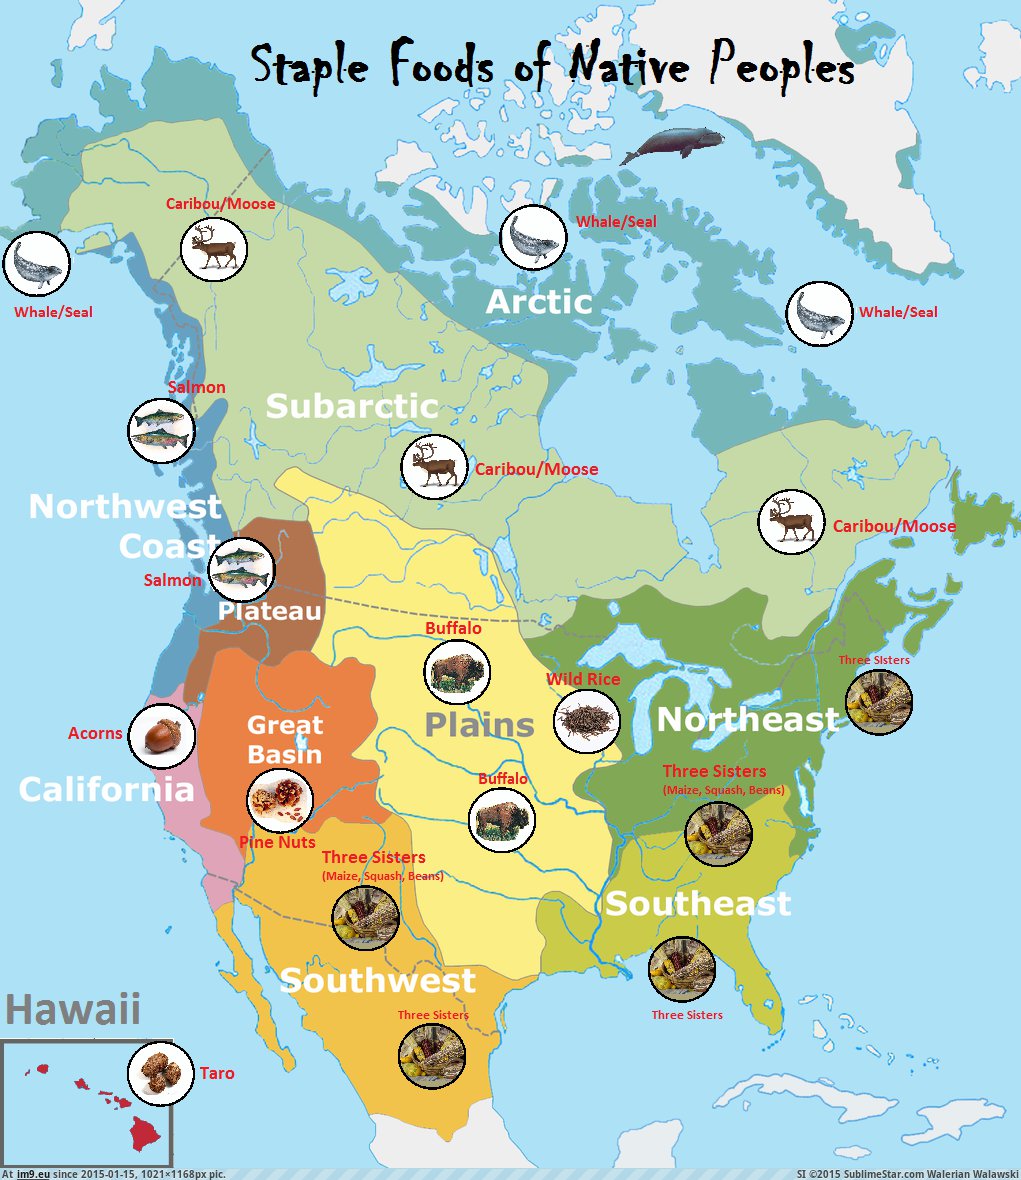 [Mapporn] Staple Foods of Native Peoples (in what is now the US and Canada)[1021x1168] (in My r/MAPS favs)